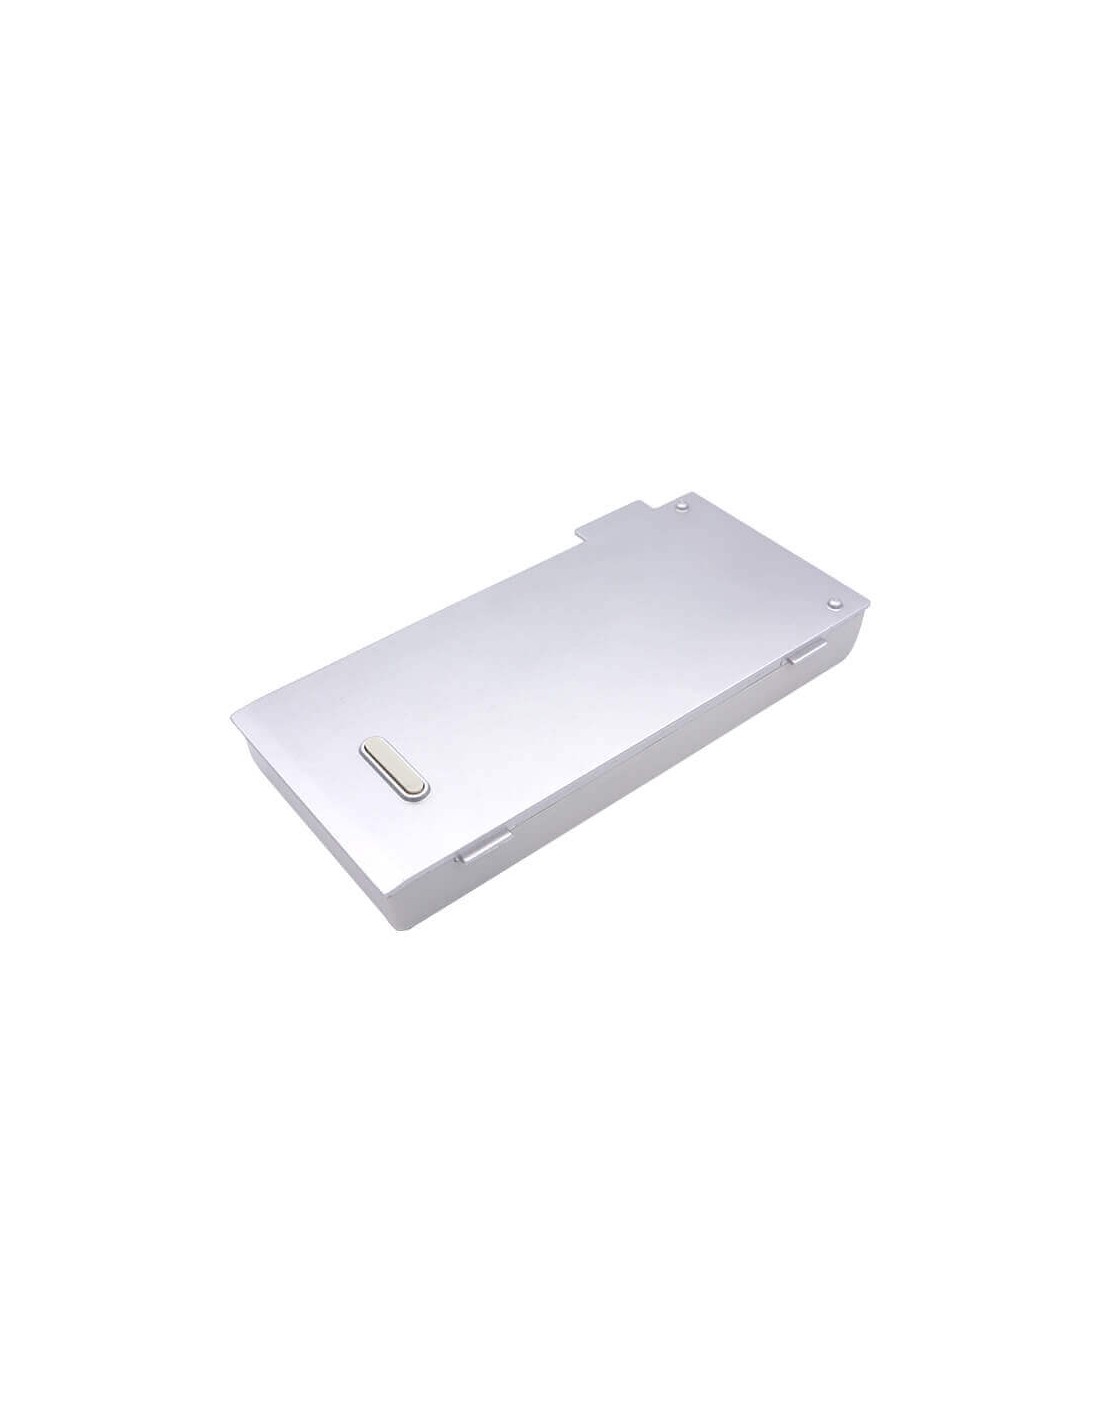 Silver Battery for Gateway Solo 600, Solo 600yg2, Solo 600ygr 11.1V, 4400mAh - 48.84Wh